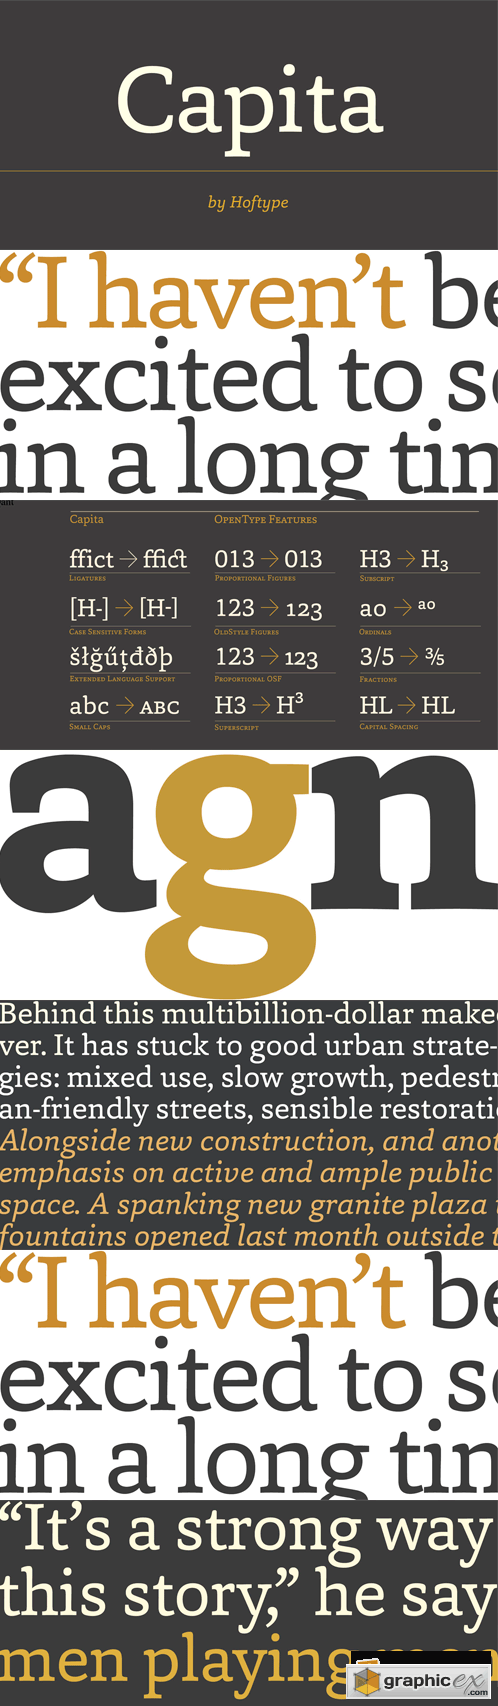 Capita Font Family - 12 Fonts for $198